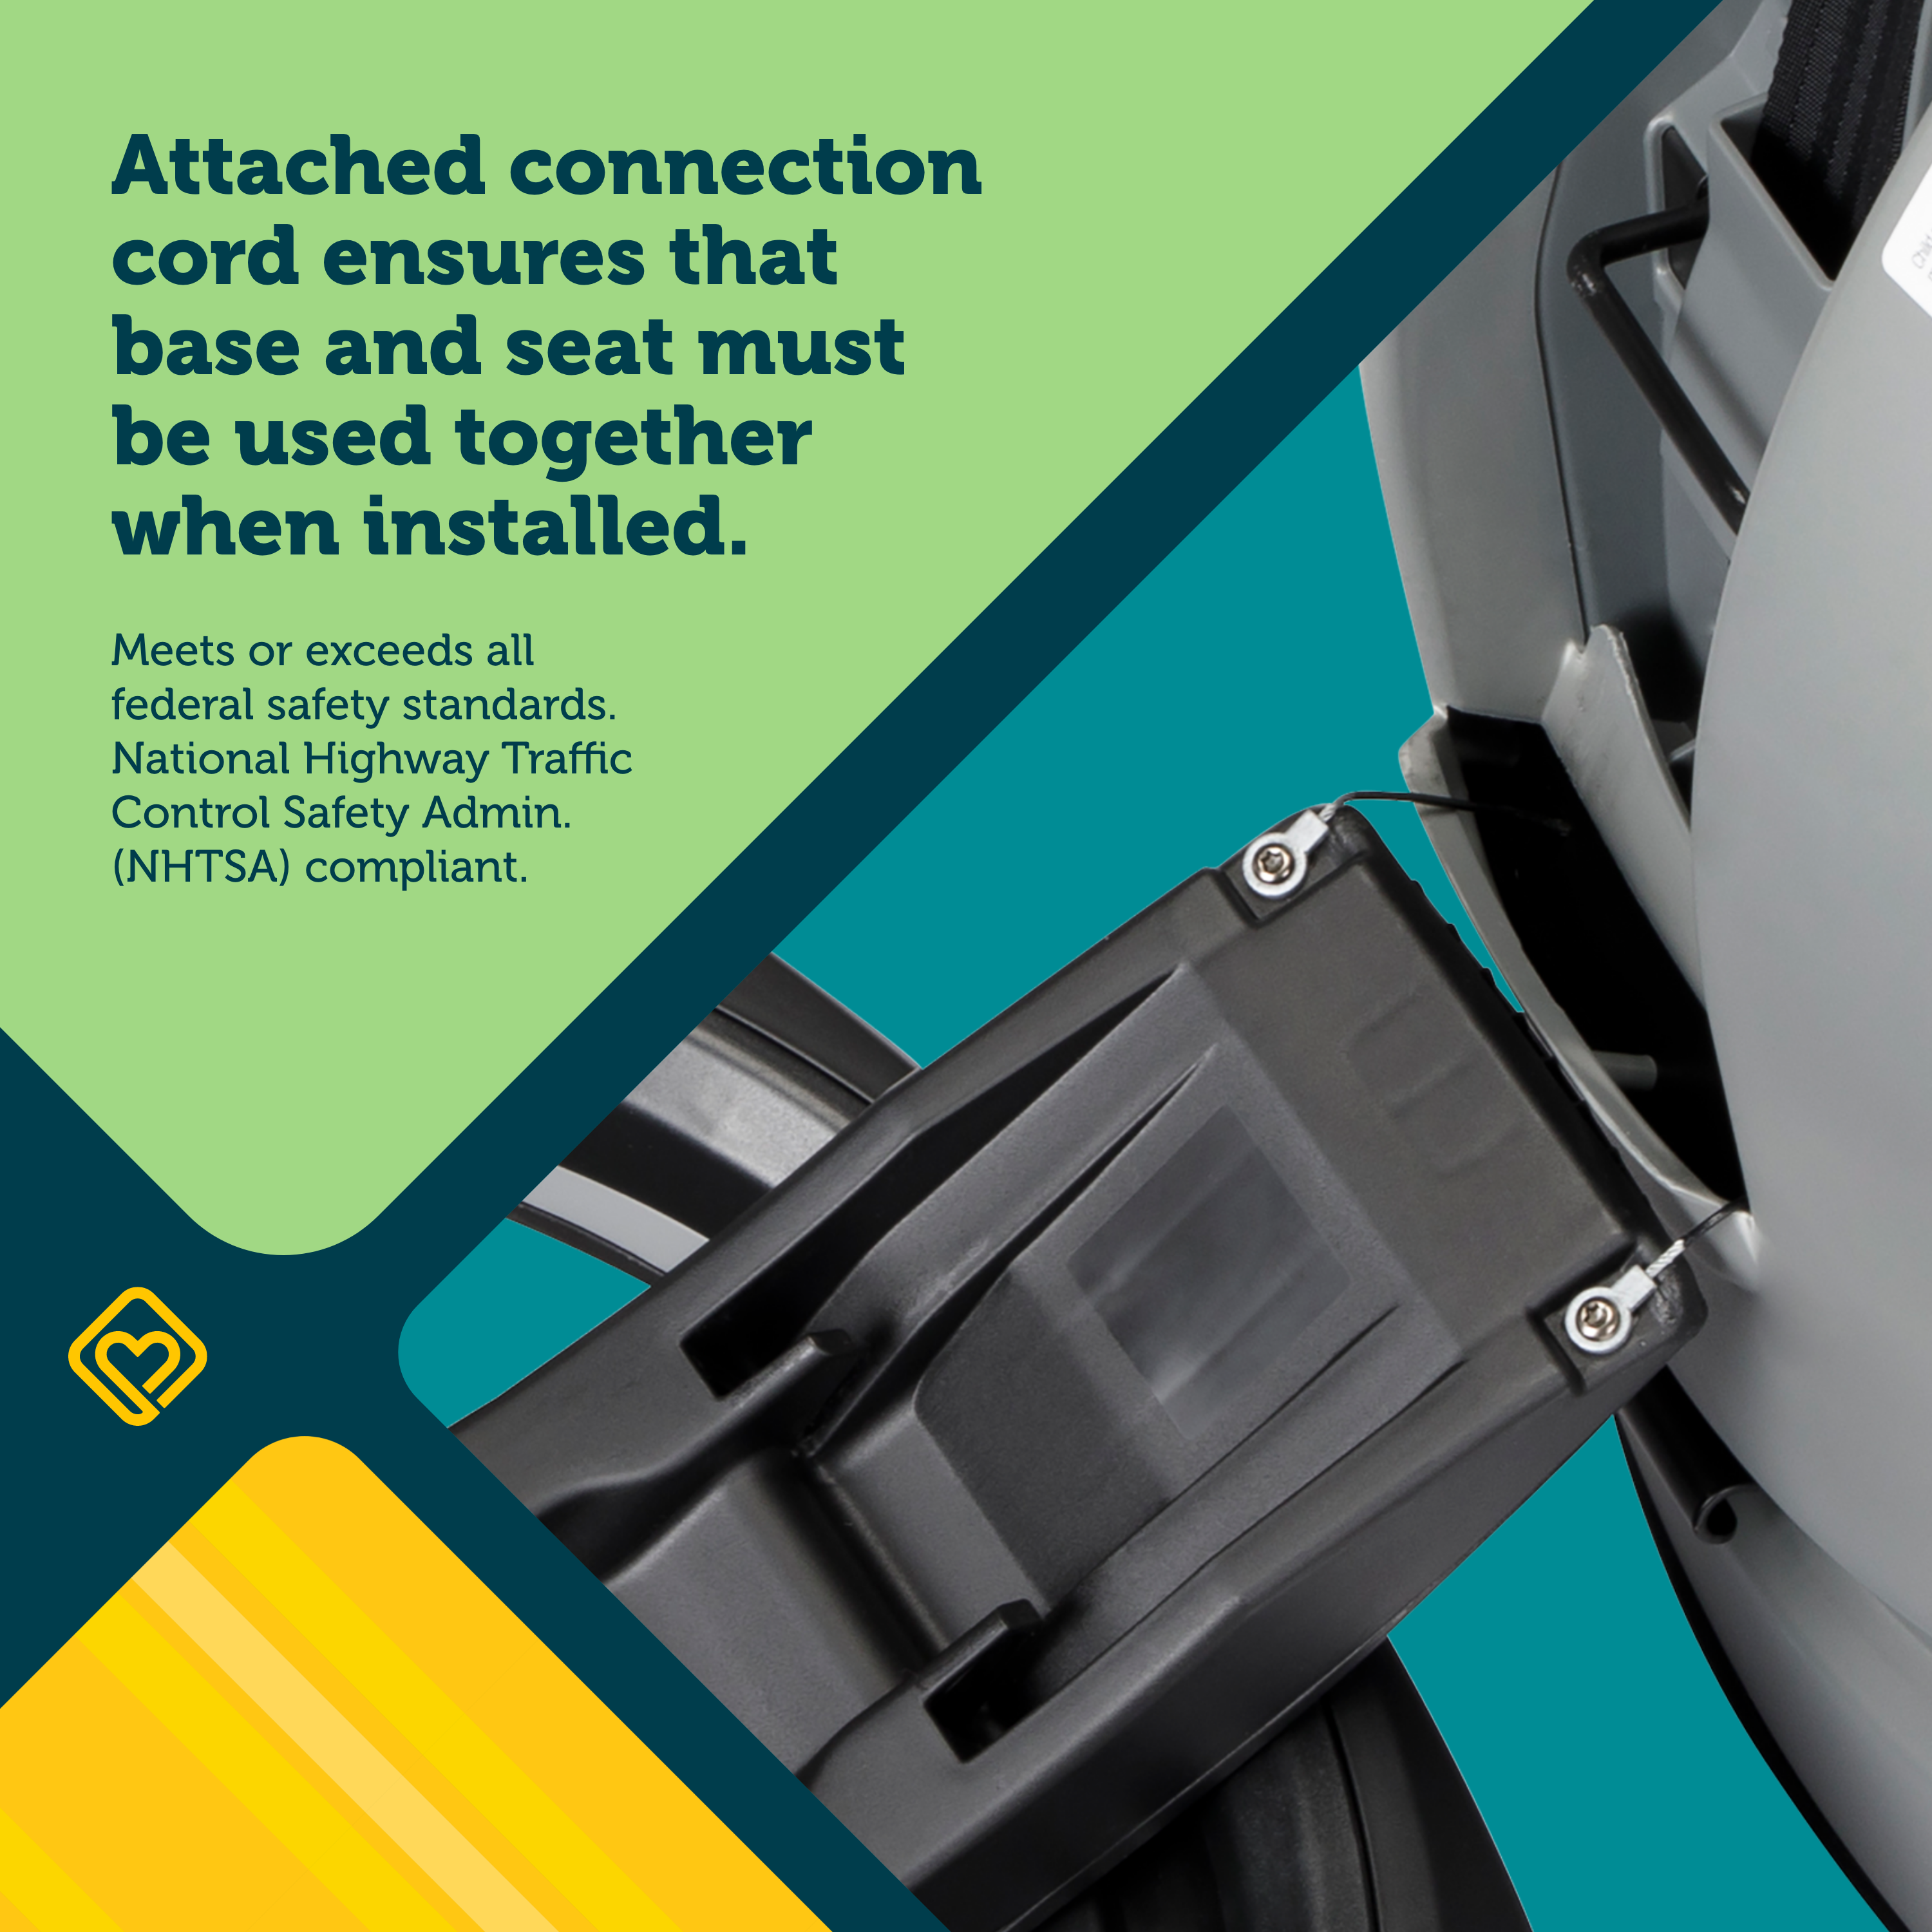 Turn and Go 360 DLX Rotating All-in-One Convertible Car Seat - attached connection cord ensures that base and seat must be used together when installed - meets or exceeds all federal safety standards. National Highway Traffic Control Safety Admin. (NHTSA) compliant